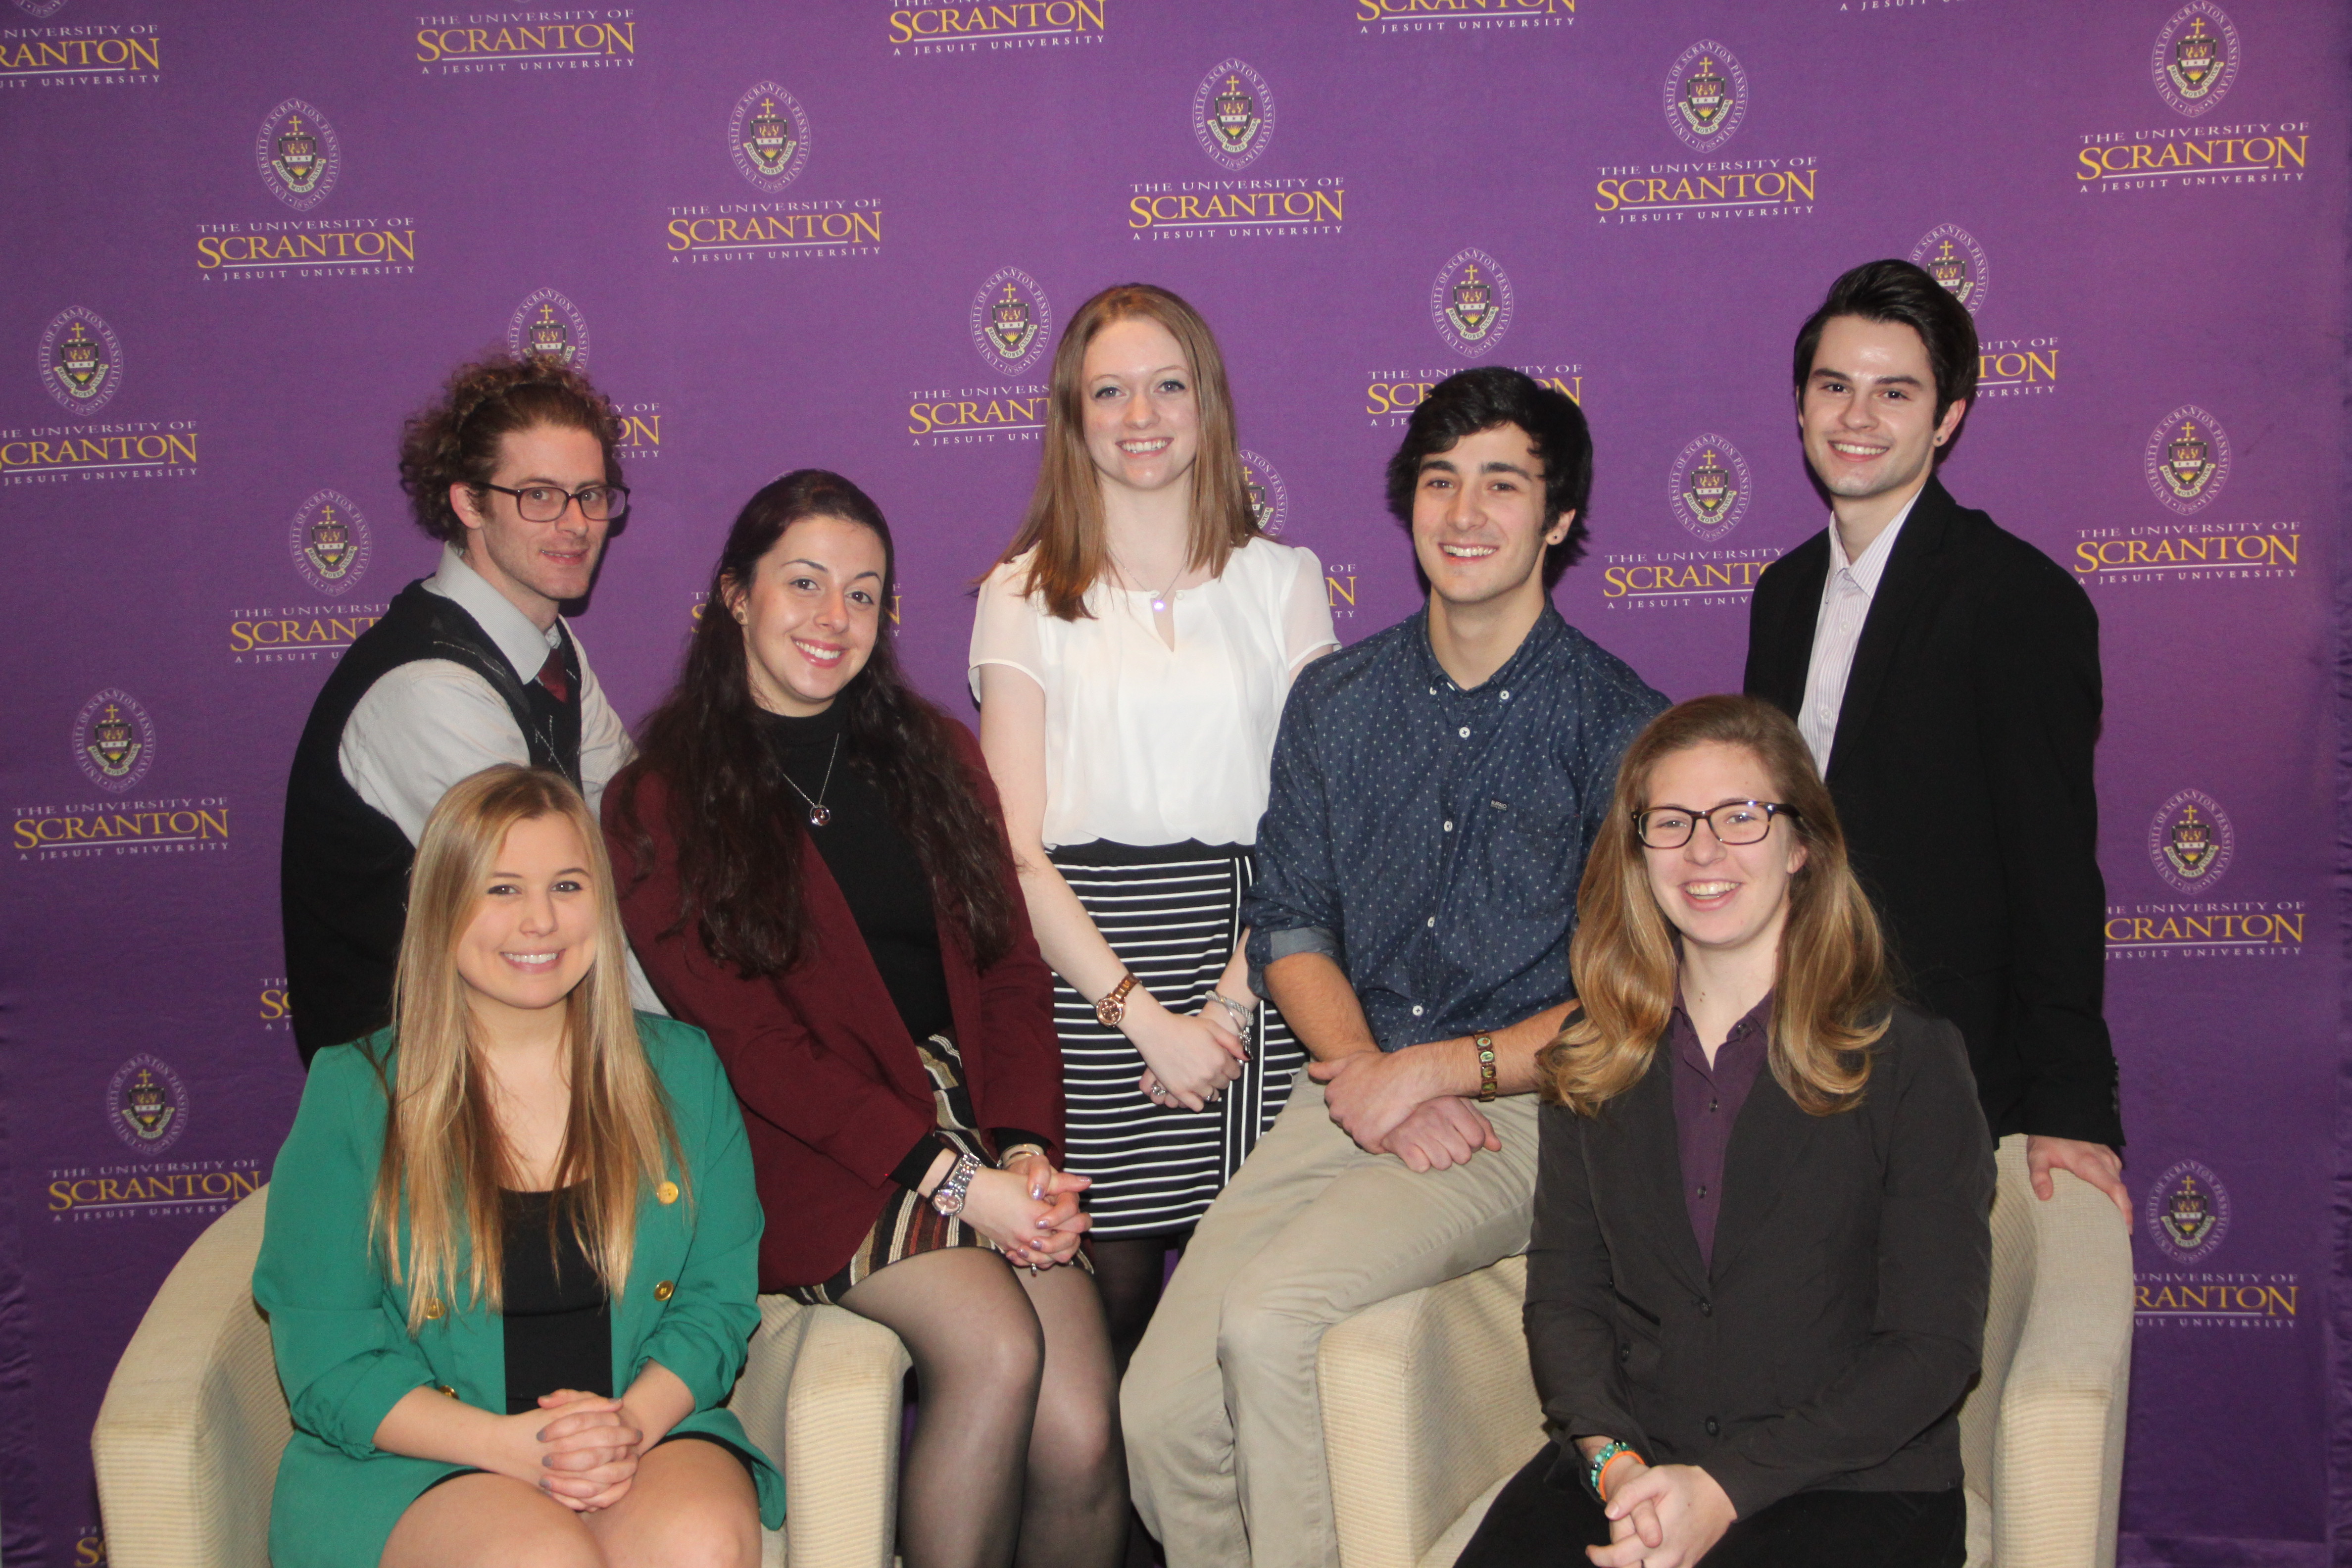 Seven University of Scranton students participated in the American Advertising Federation’s National Student Advertising Competition. The team placed fifth in District 2 of the national competition. Seated in front row, from left, are Scranton’s 2016 Advertising Competition Team members Carly Murphy and Amy Verdonik. Back row are: Jedediah Stewart, Amelia Cheikhali, Karen Mennella, Zachary Arkins and Julian Wilusz.